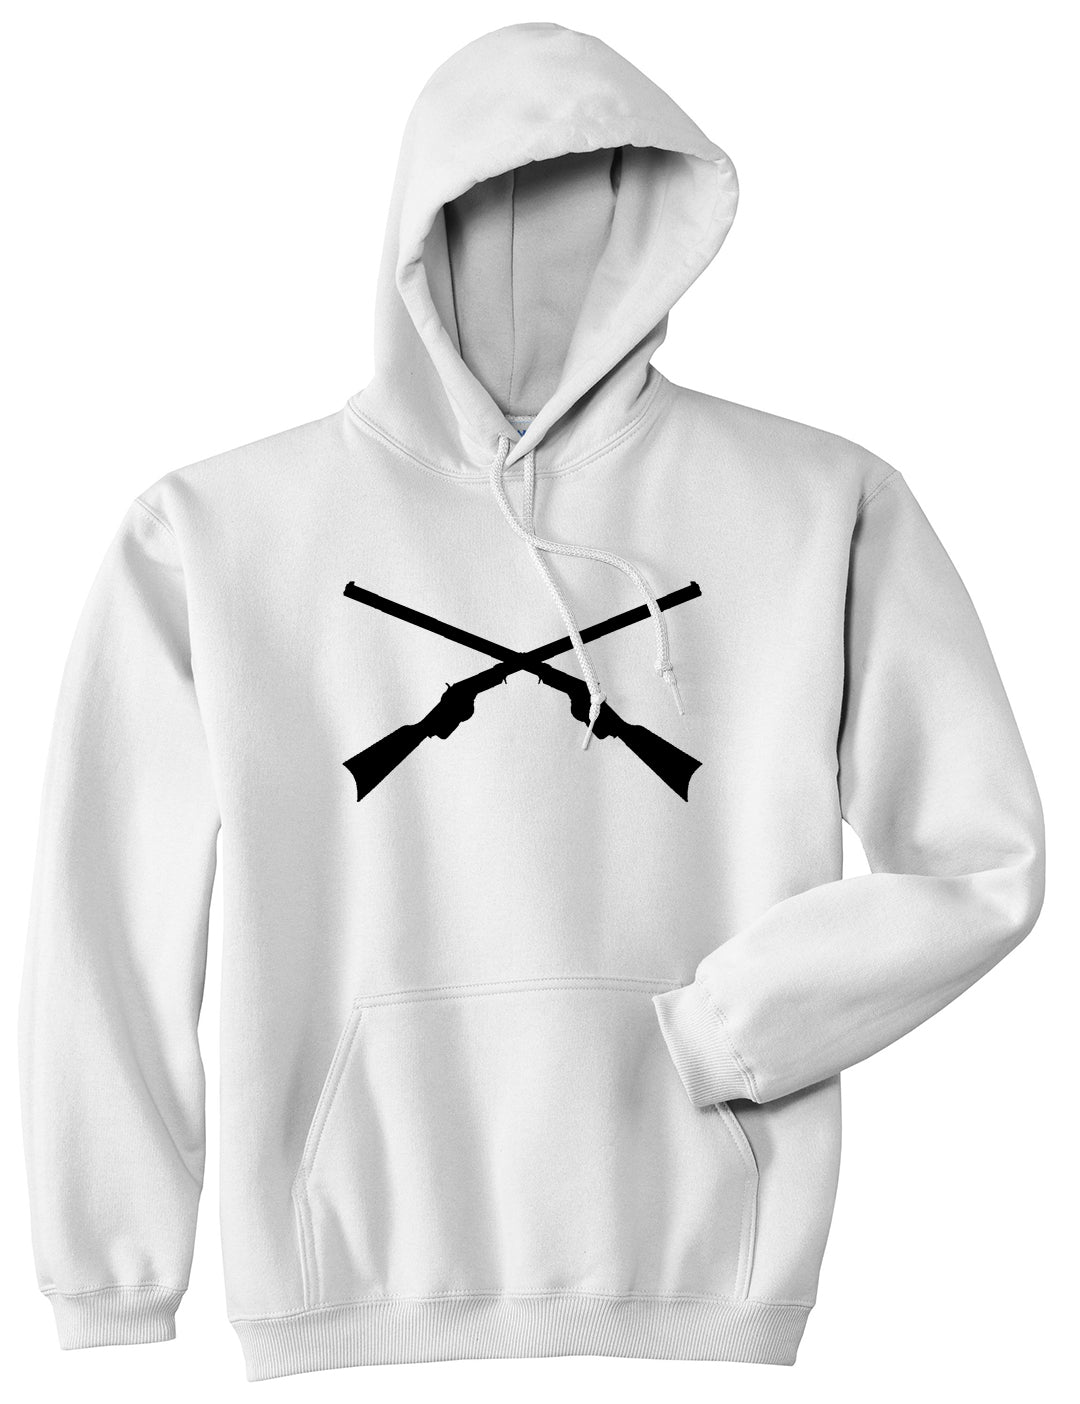 Civil War Guns Crossed White Pullover Hoodie by Kings Of NY